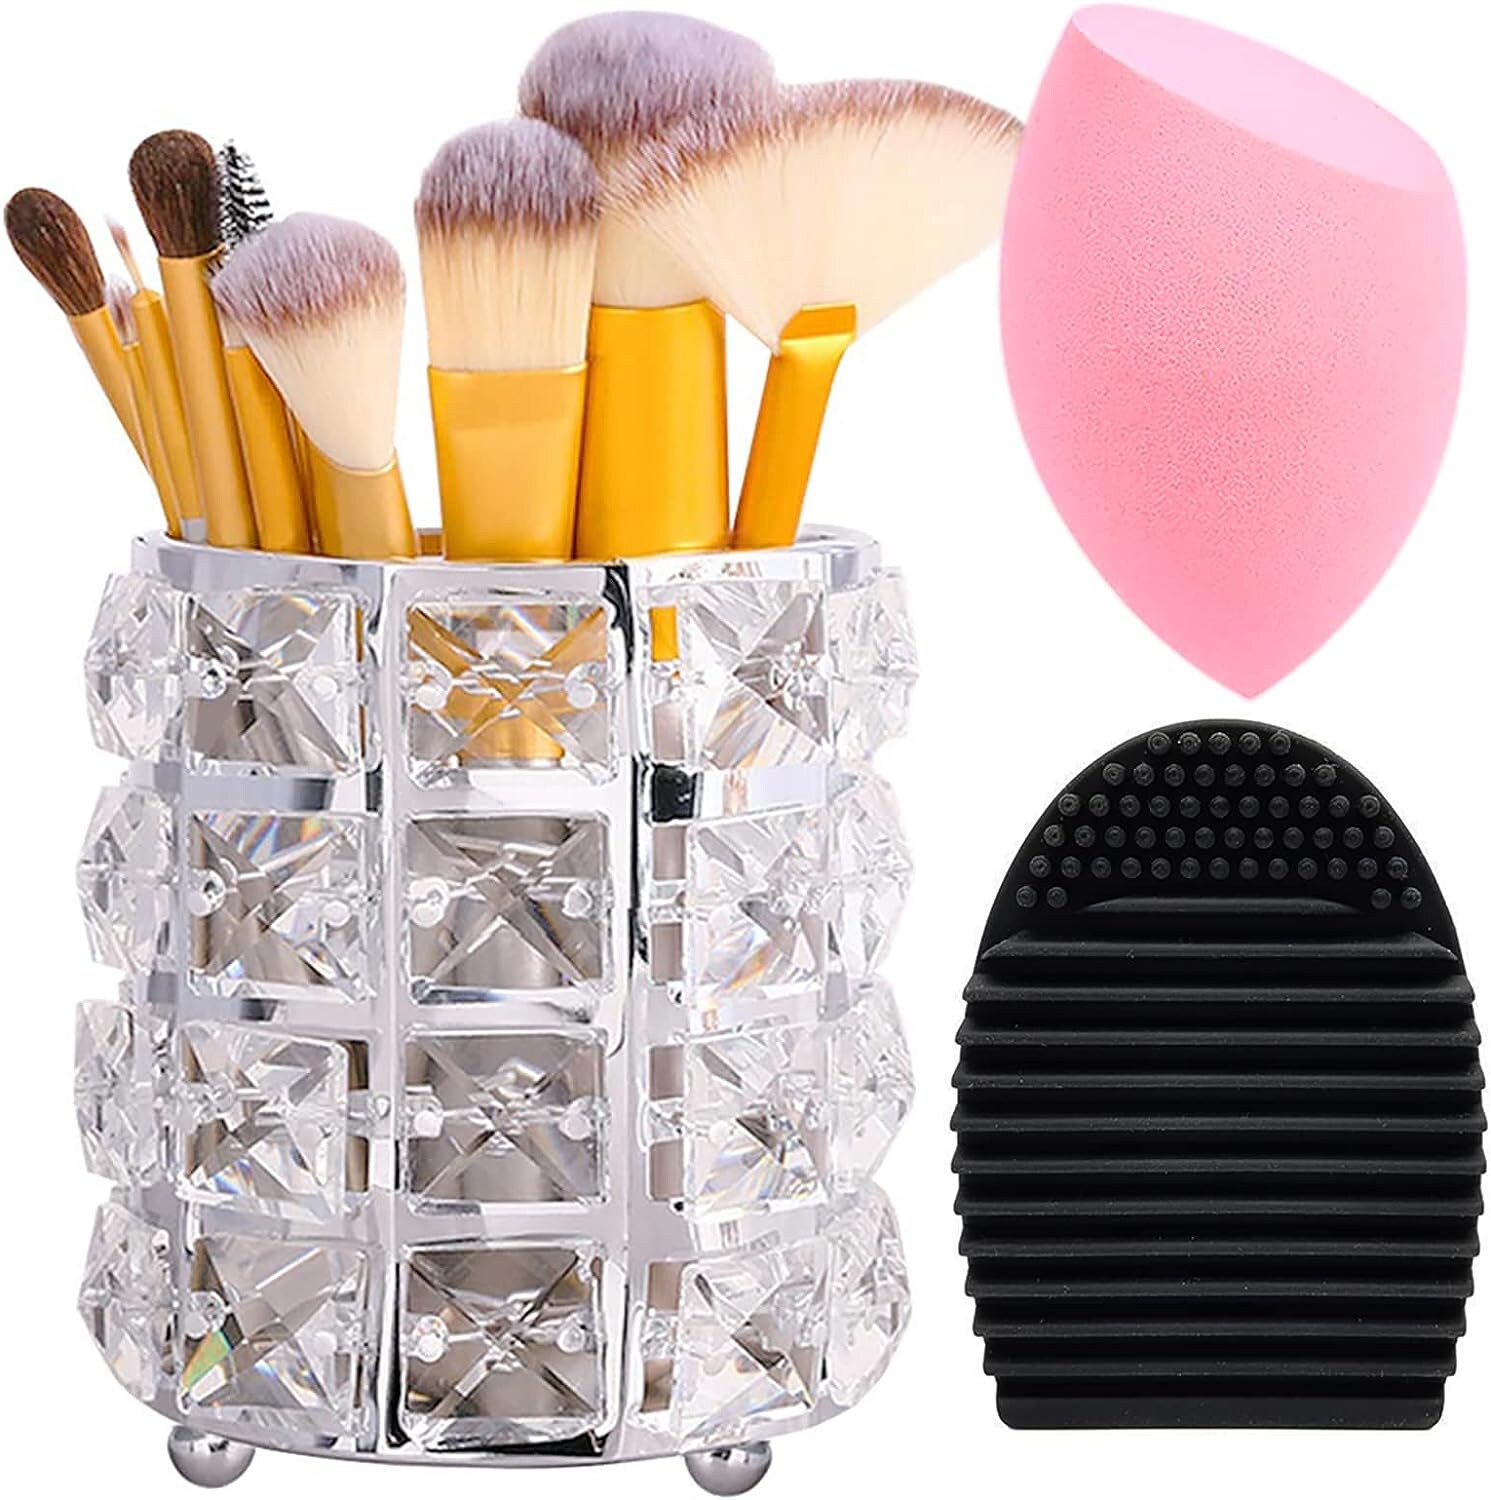 Makeup Brush Cleaner Solid Soap and Silicone Tray for Makeup Brushes and  Makeup Sponges 